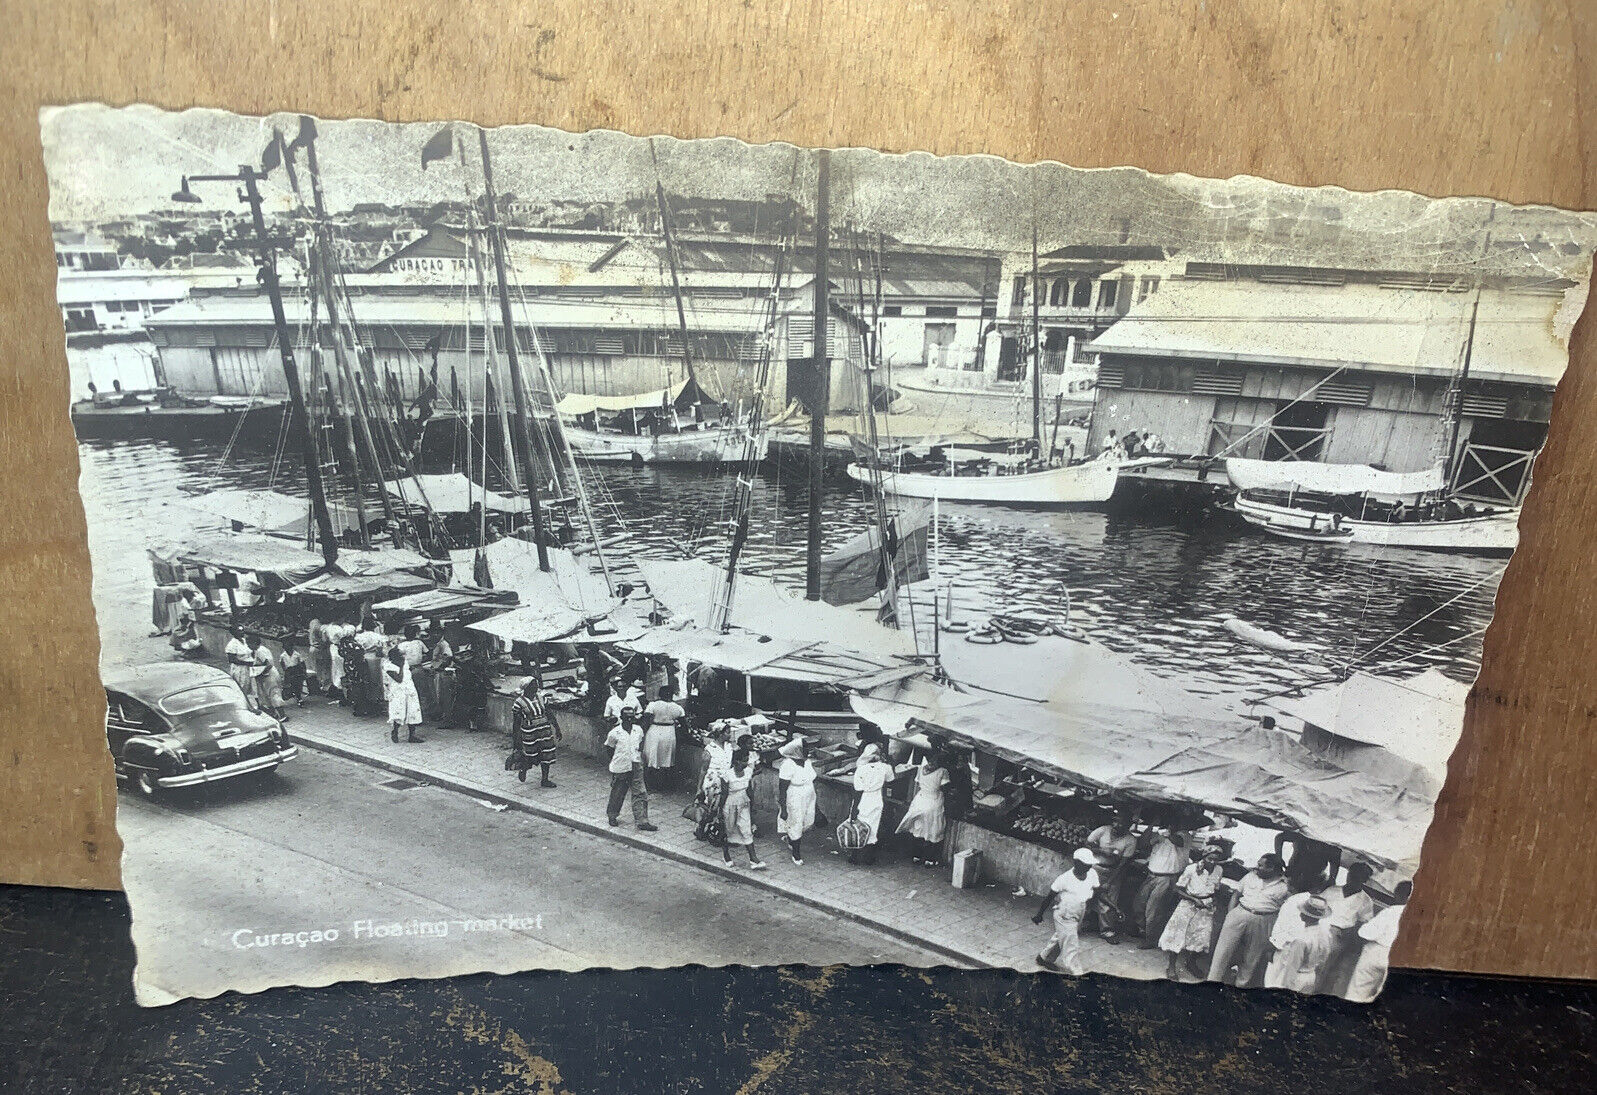 Curacao Floating Market -Postcard- Old Car, Venders, Boats RPPC